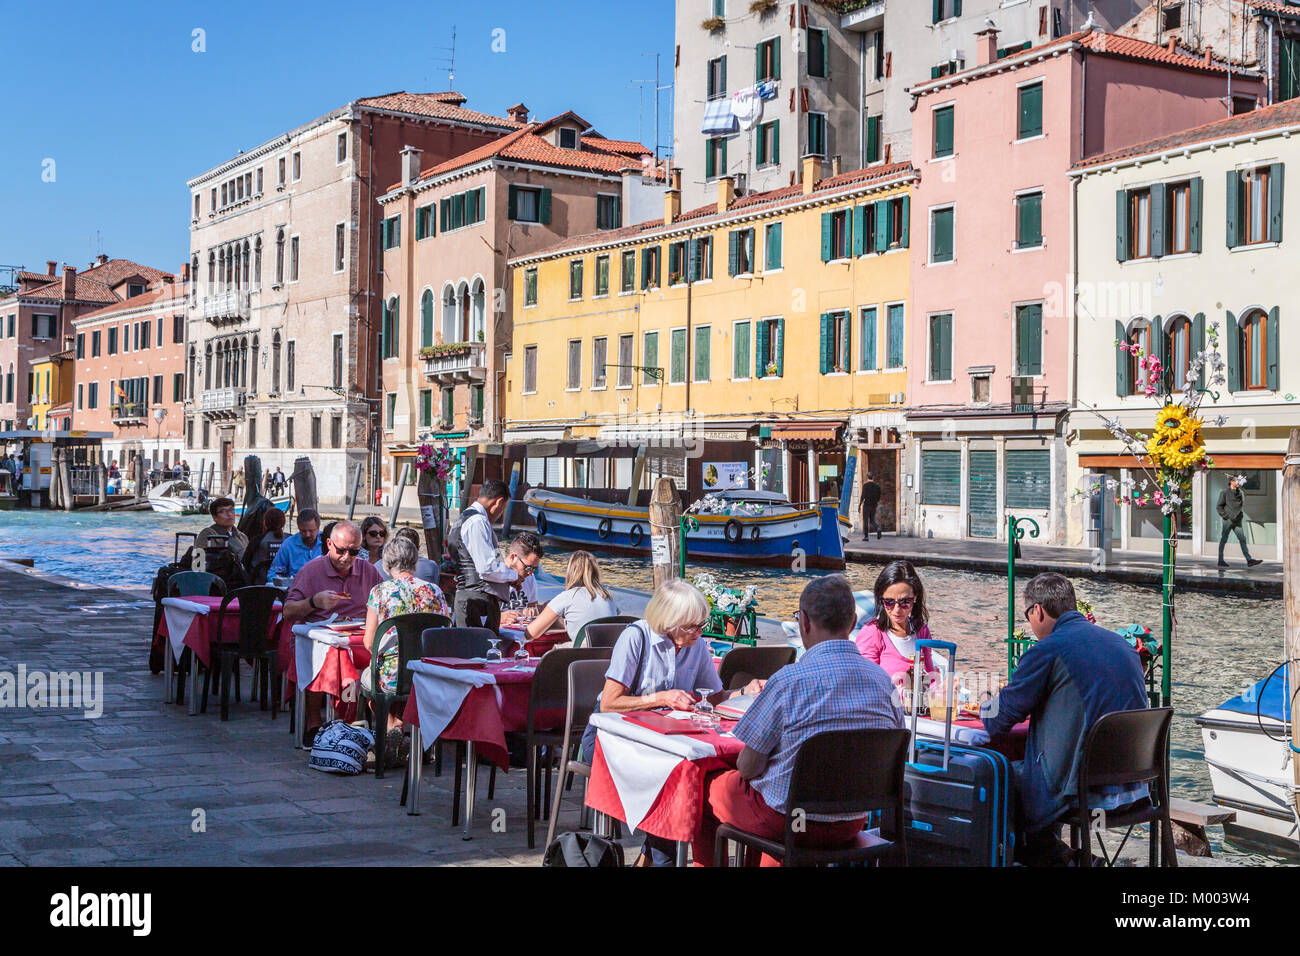 A canal-side restaurant in Veneto, Venice, Italy, Europe. Stock Photo